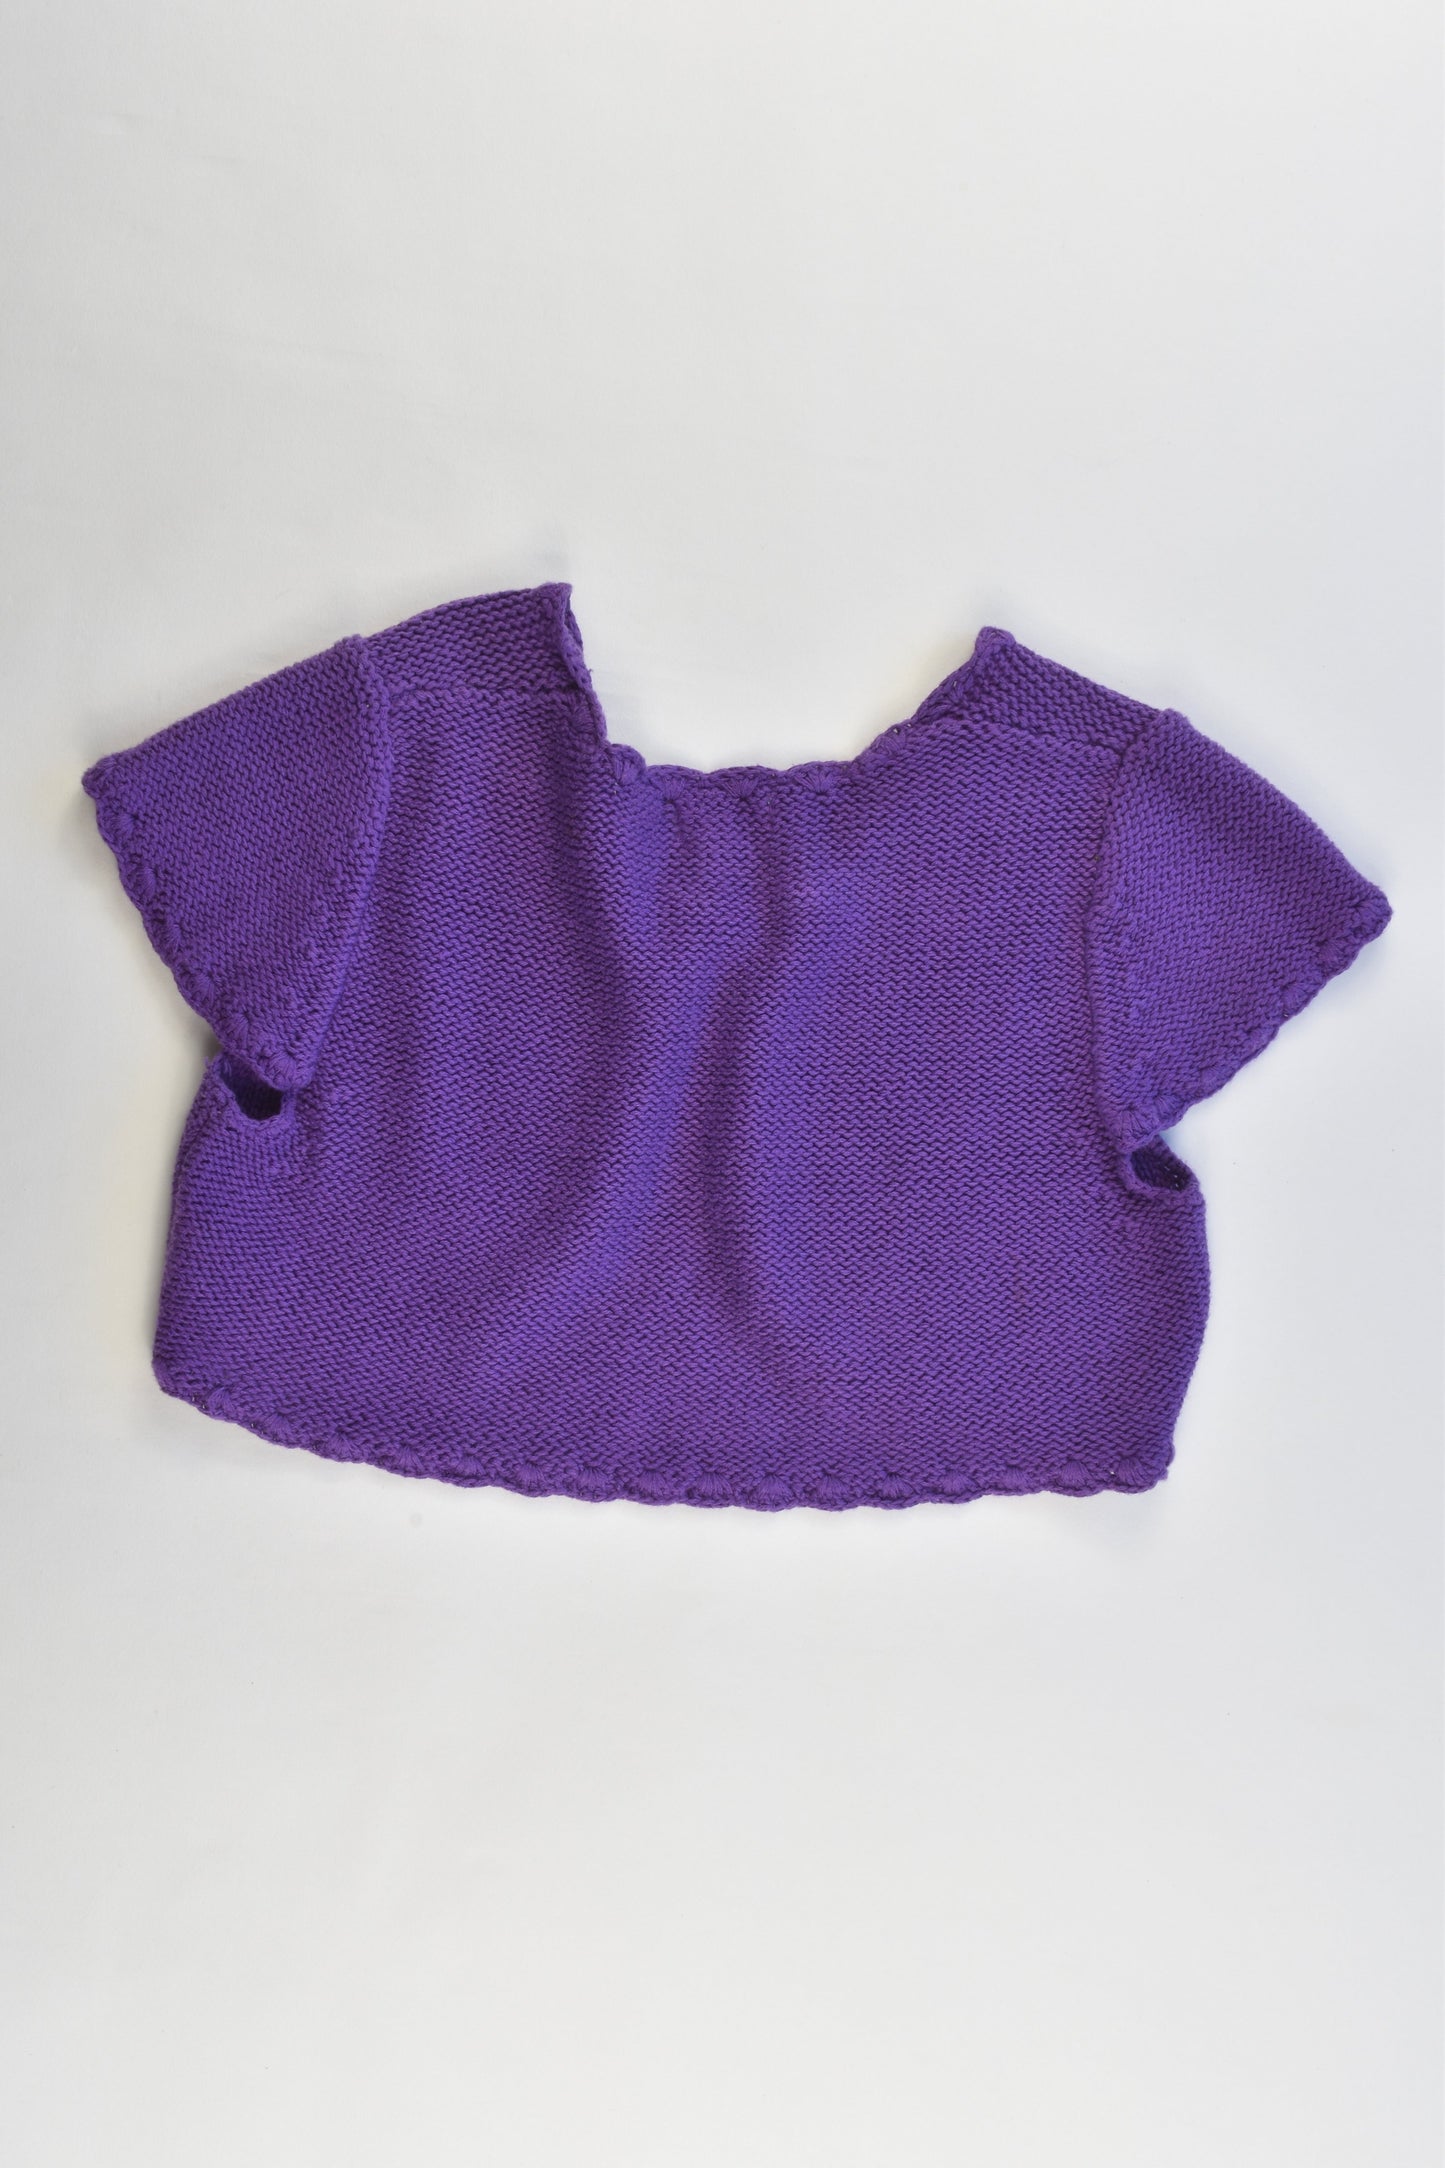 NEW Monsoon Size 6-8 Knitted Cardigan